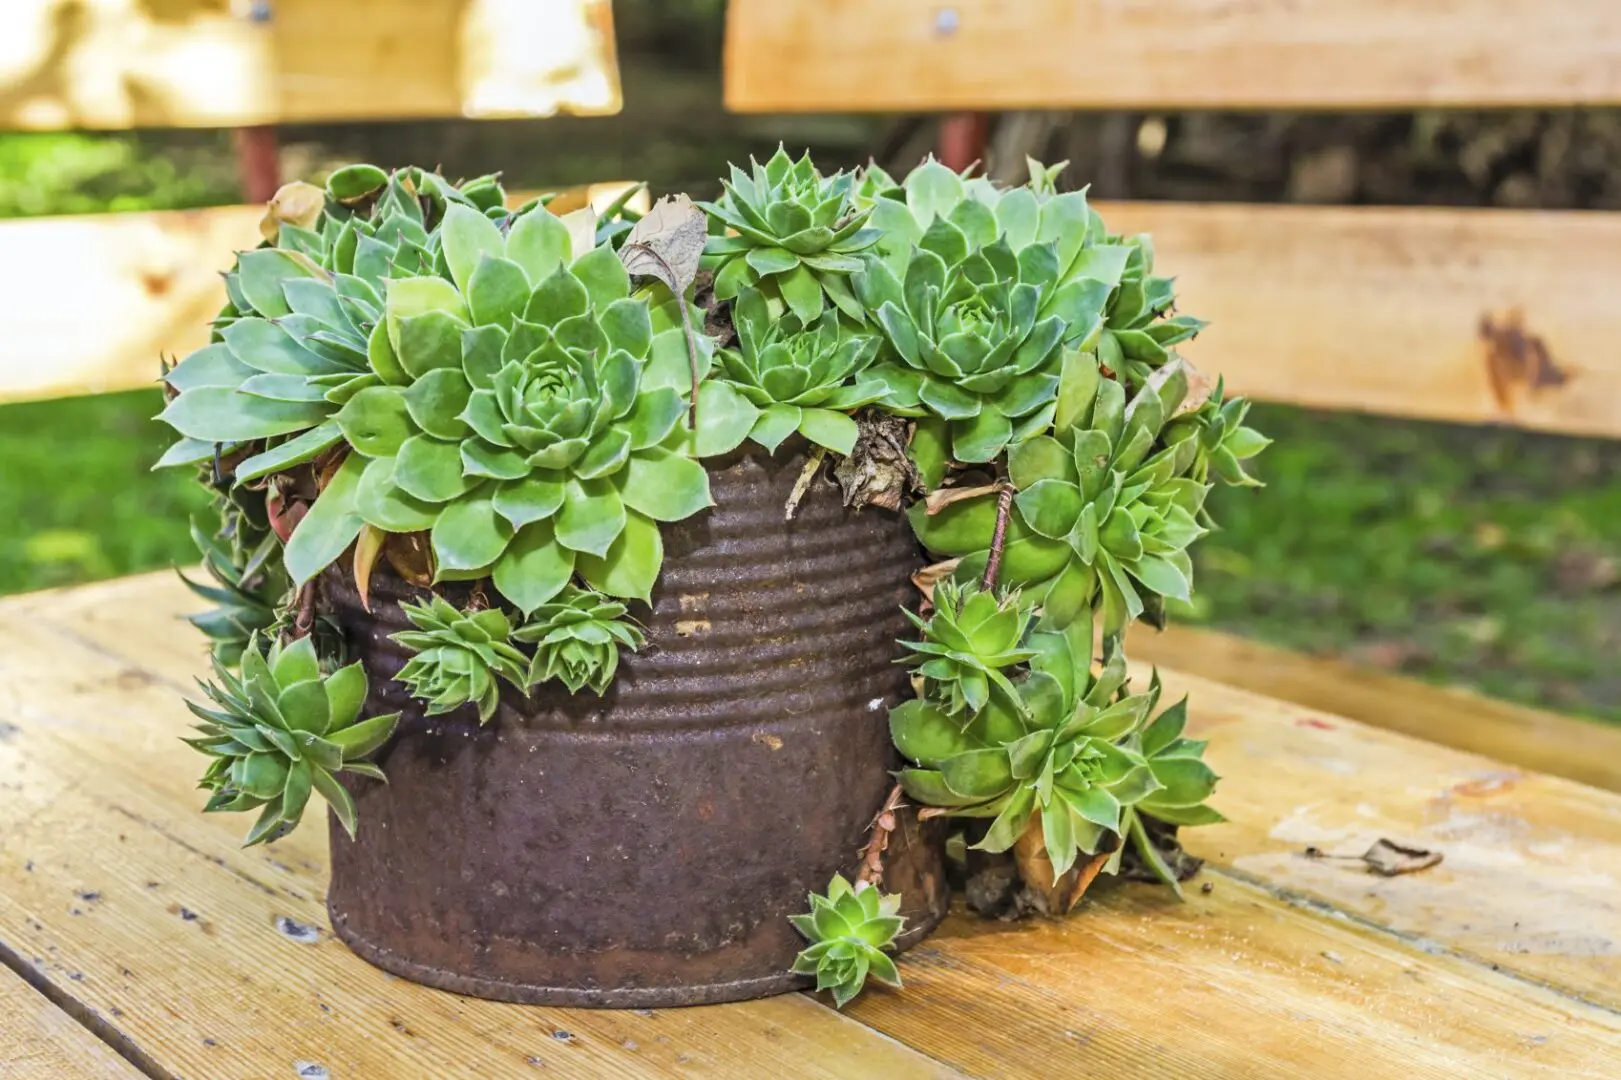 A succulent plant in a container1